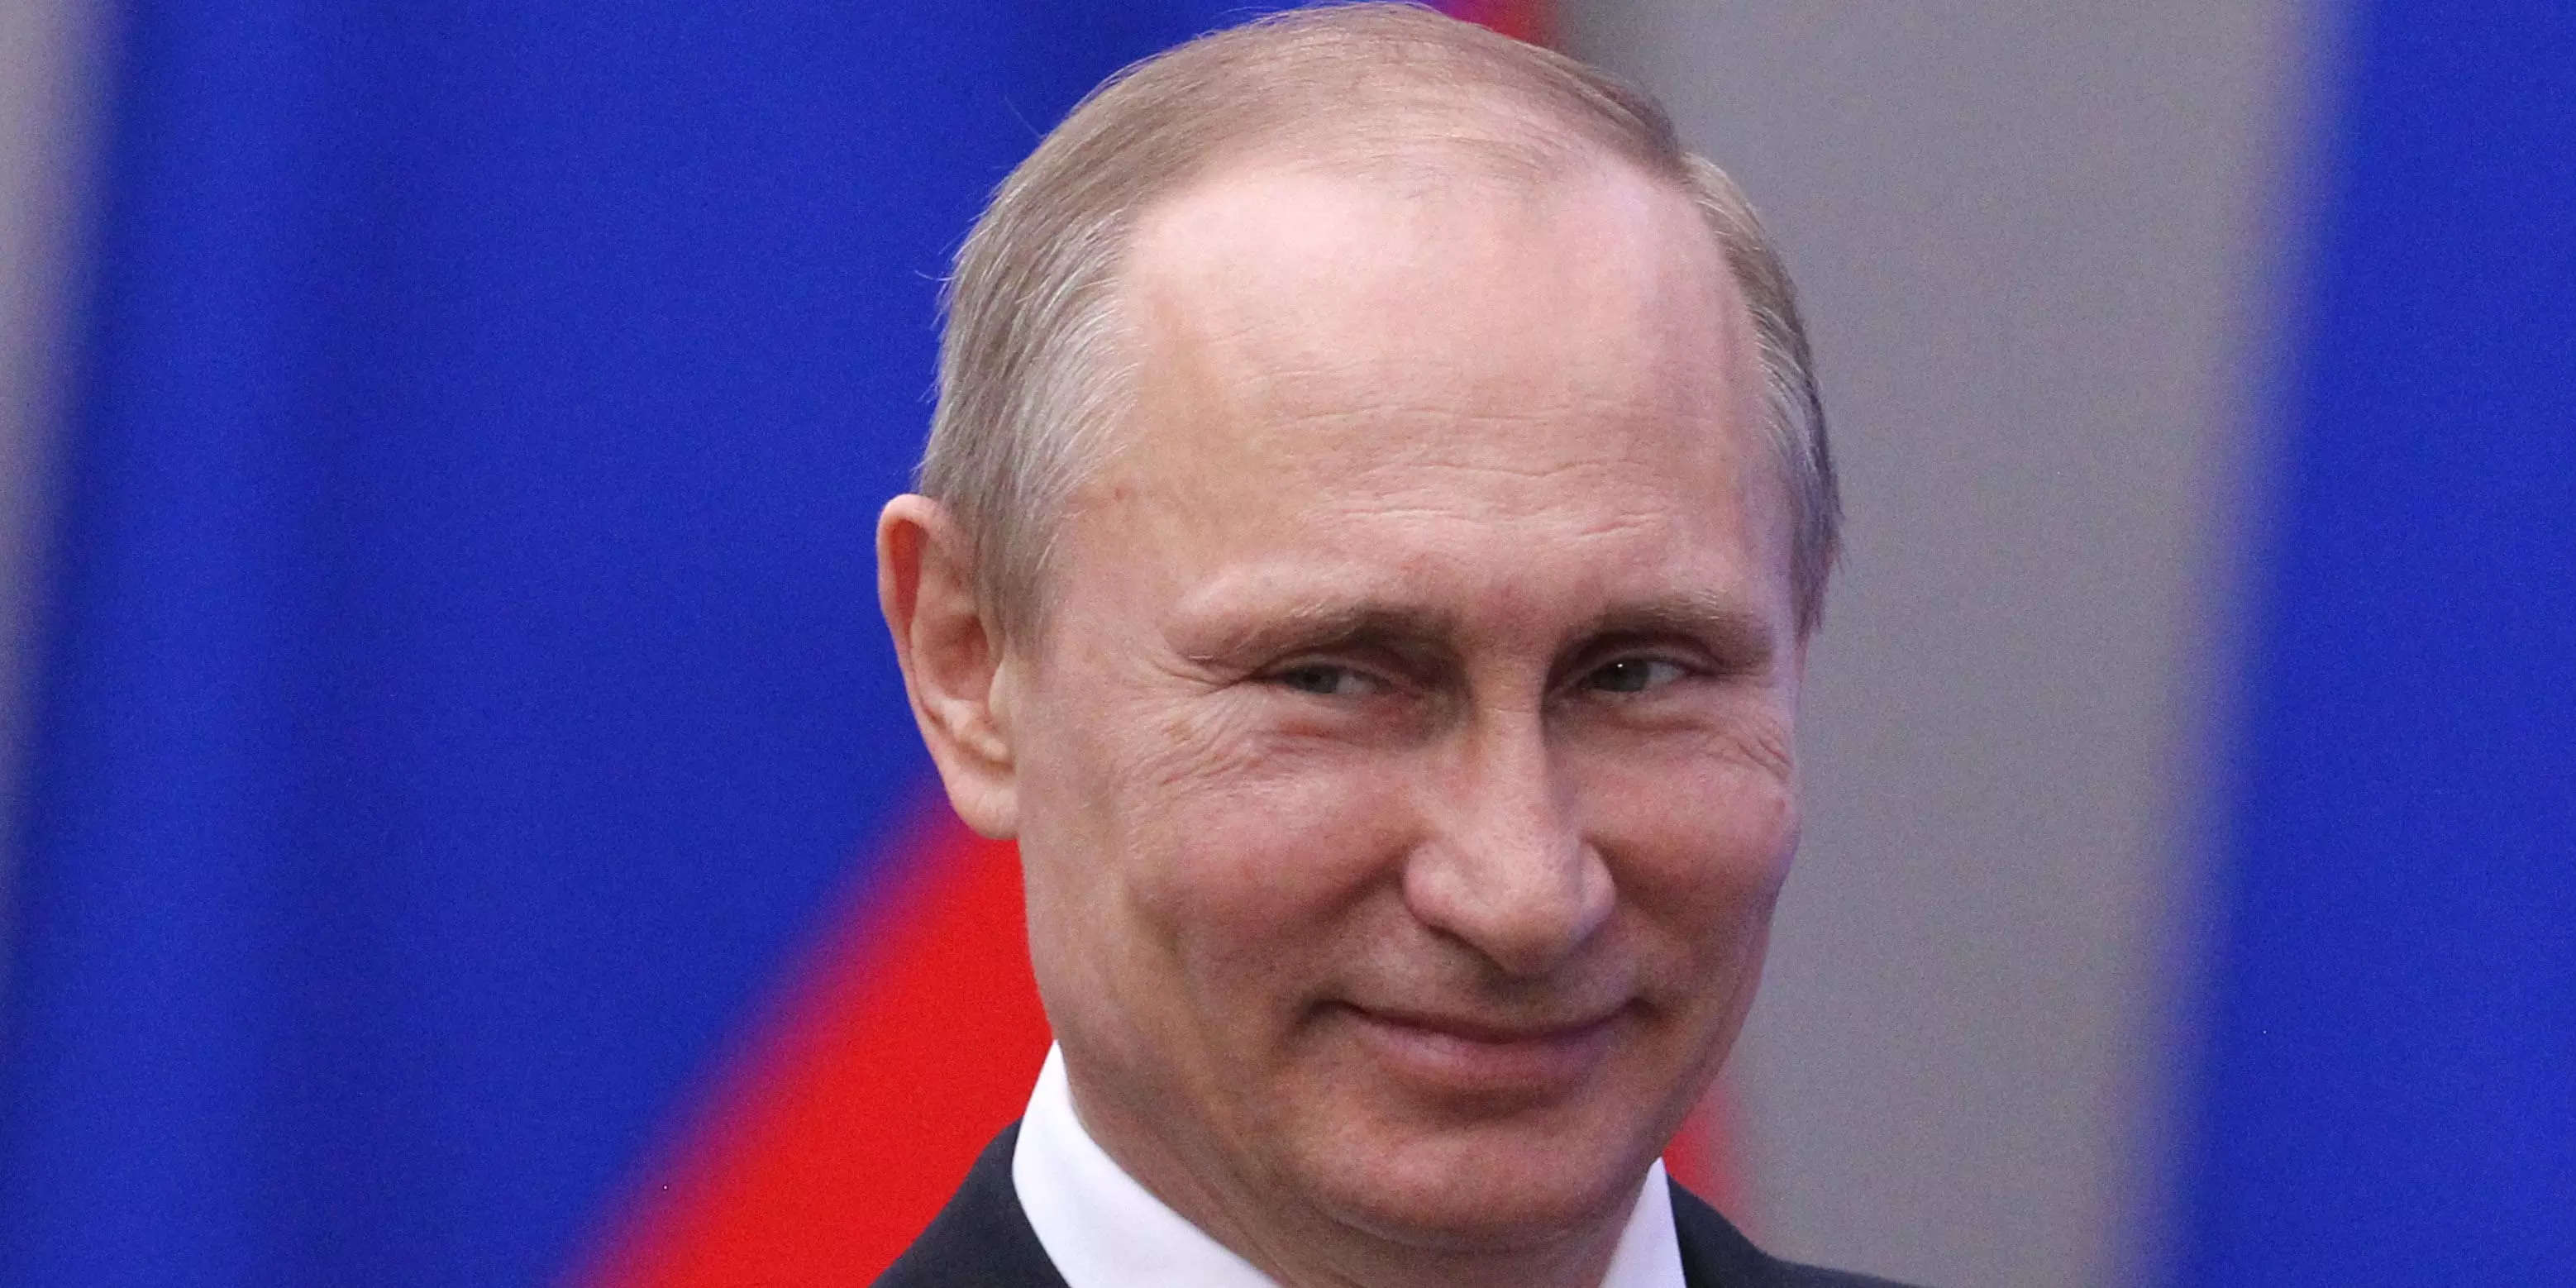 Vladimir Putin’s ‘gas blackmail’ is failing as LNG revolution allows Europe to end dependence on Russia, Yale professor says